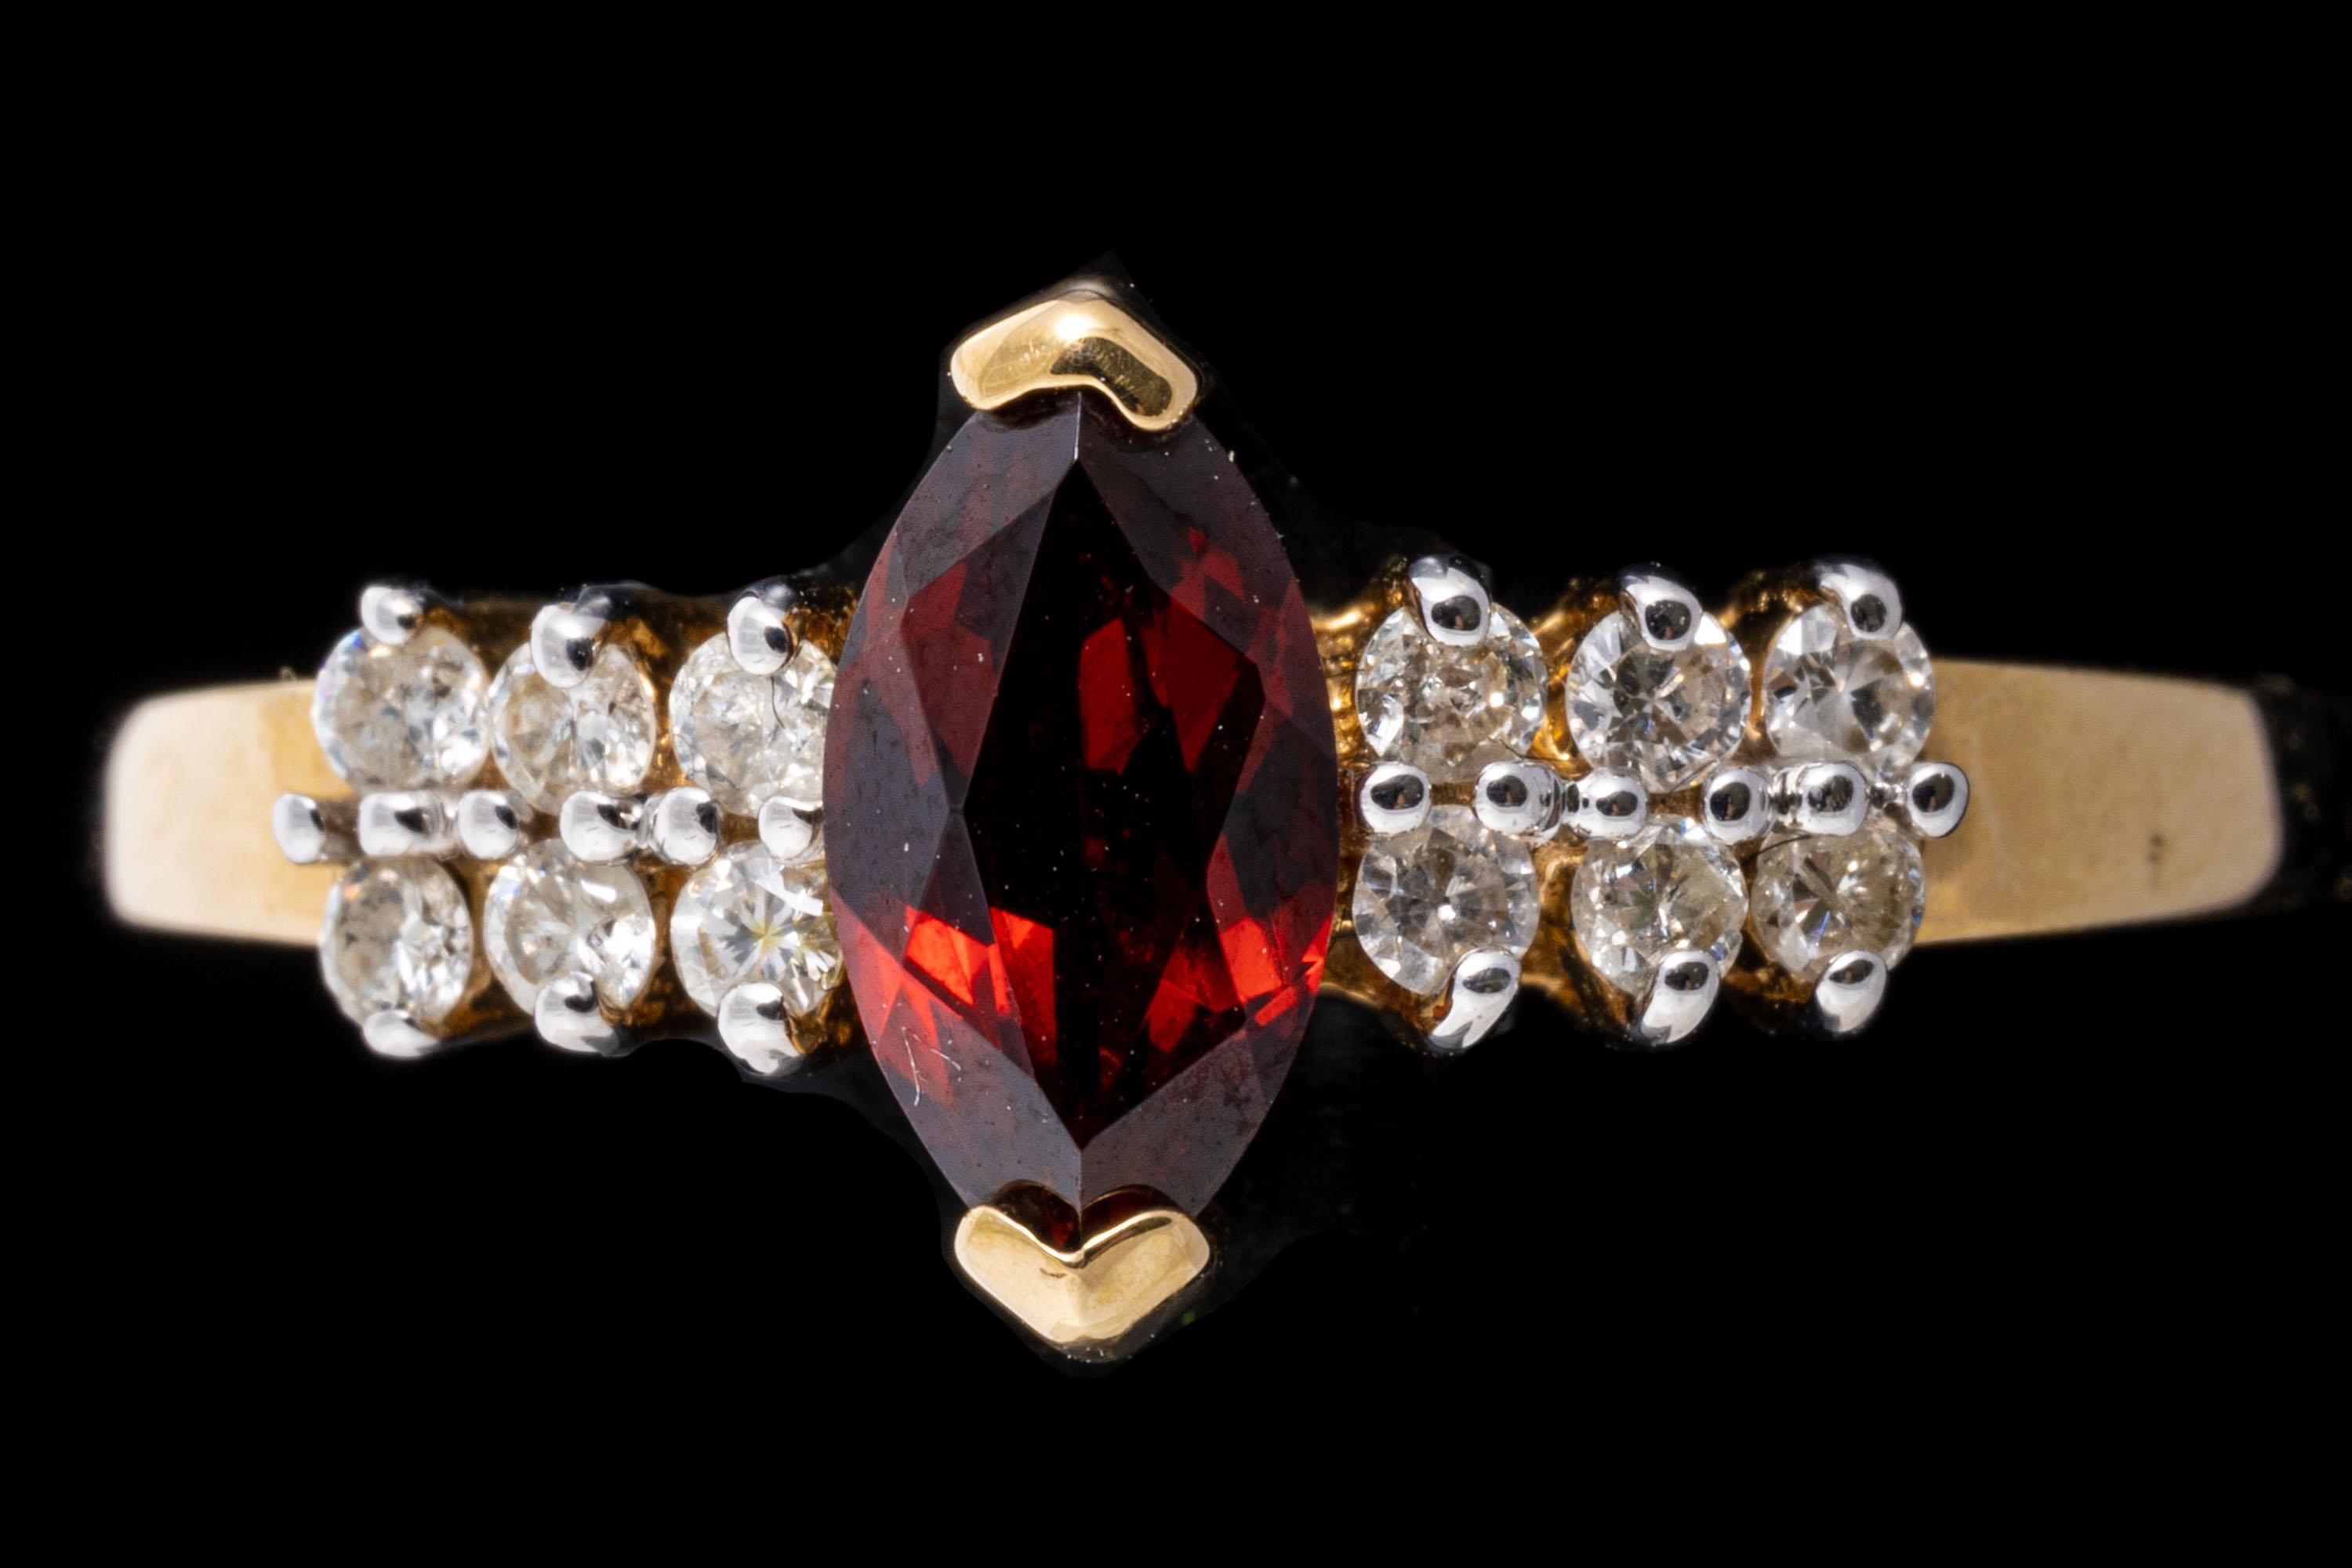 14k yellow gold ring. This classic ring has a marquise faceted shaped center, dark burgundy color, approximately 0.45 CTS, flanked by two rows of round faceted diamonds, approximately 0.12 TCW. All of the stones are prong set.
Marks: 14k